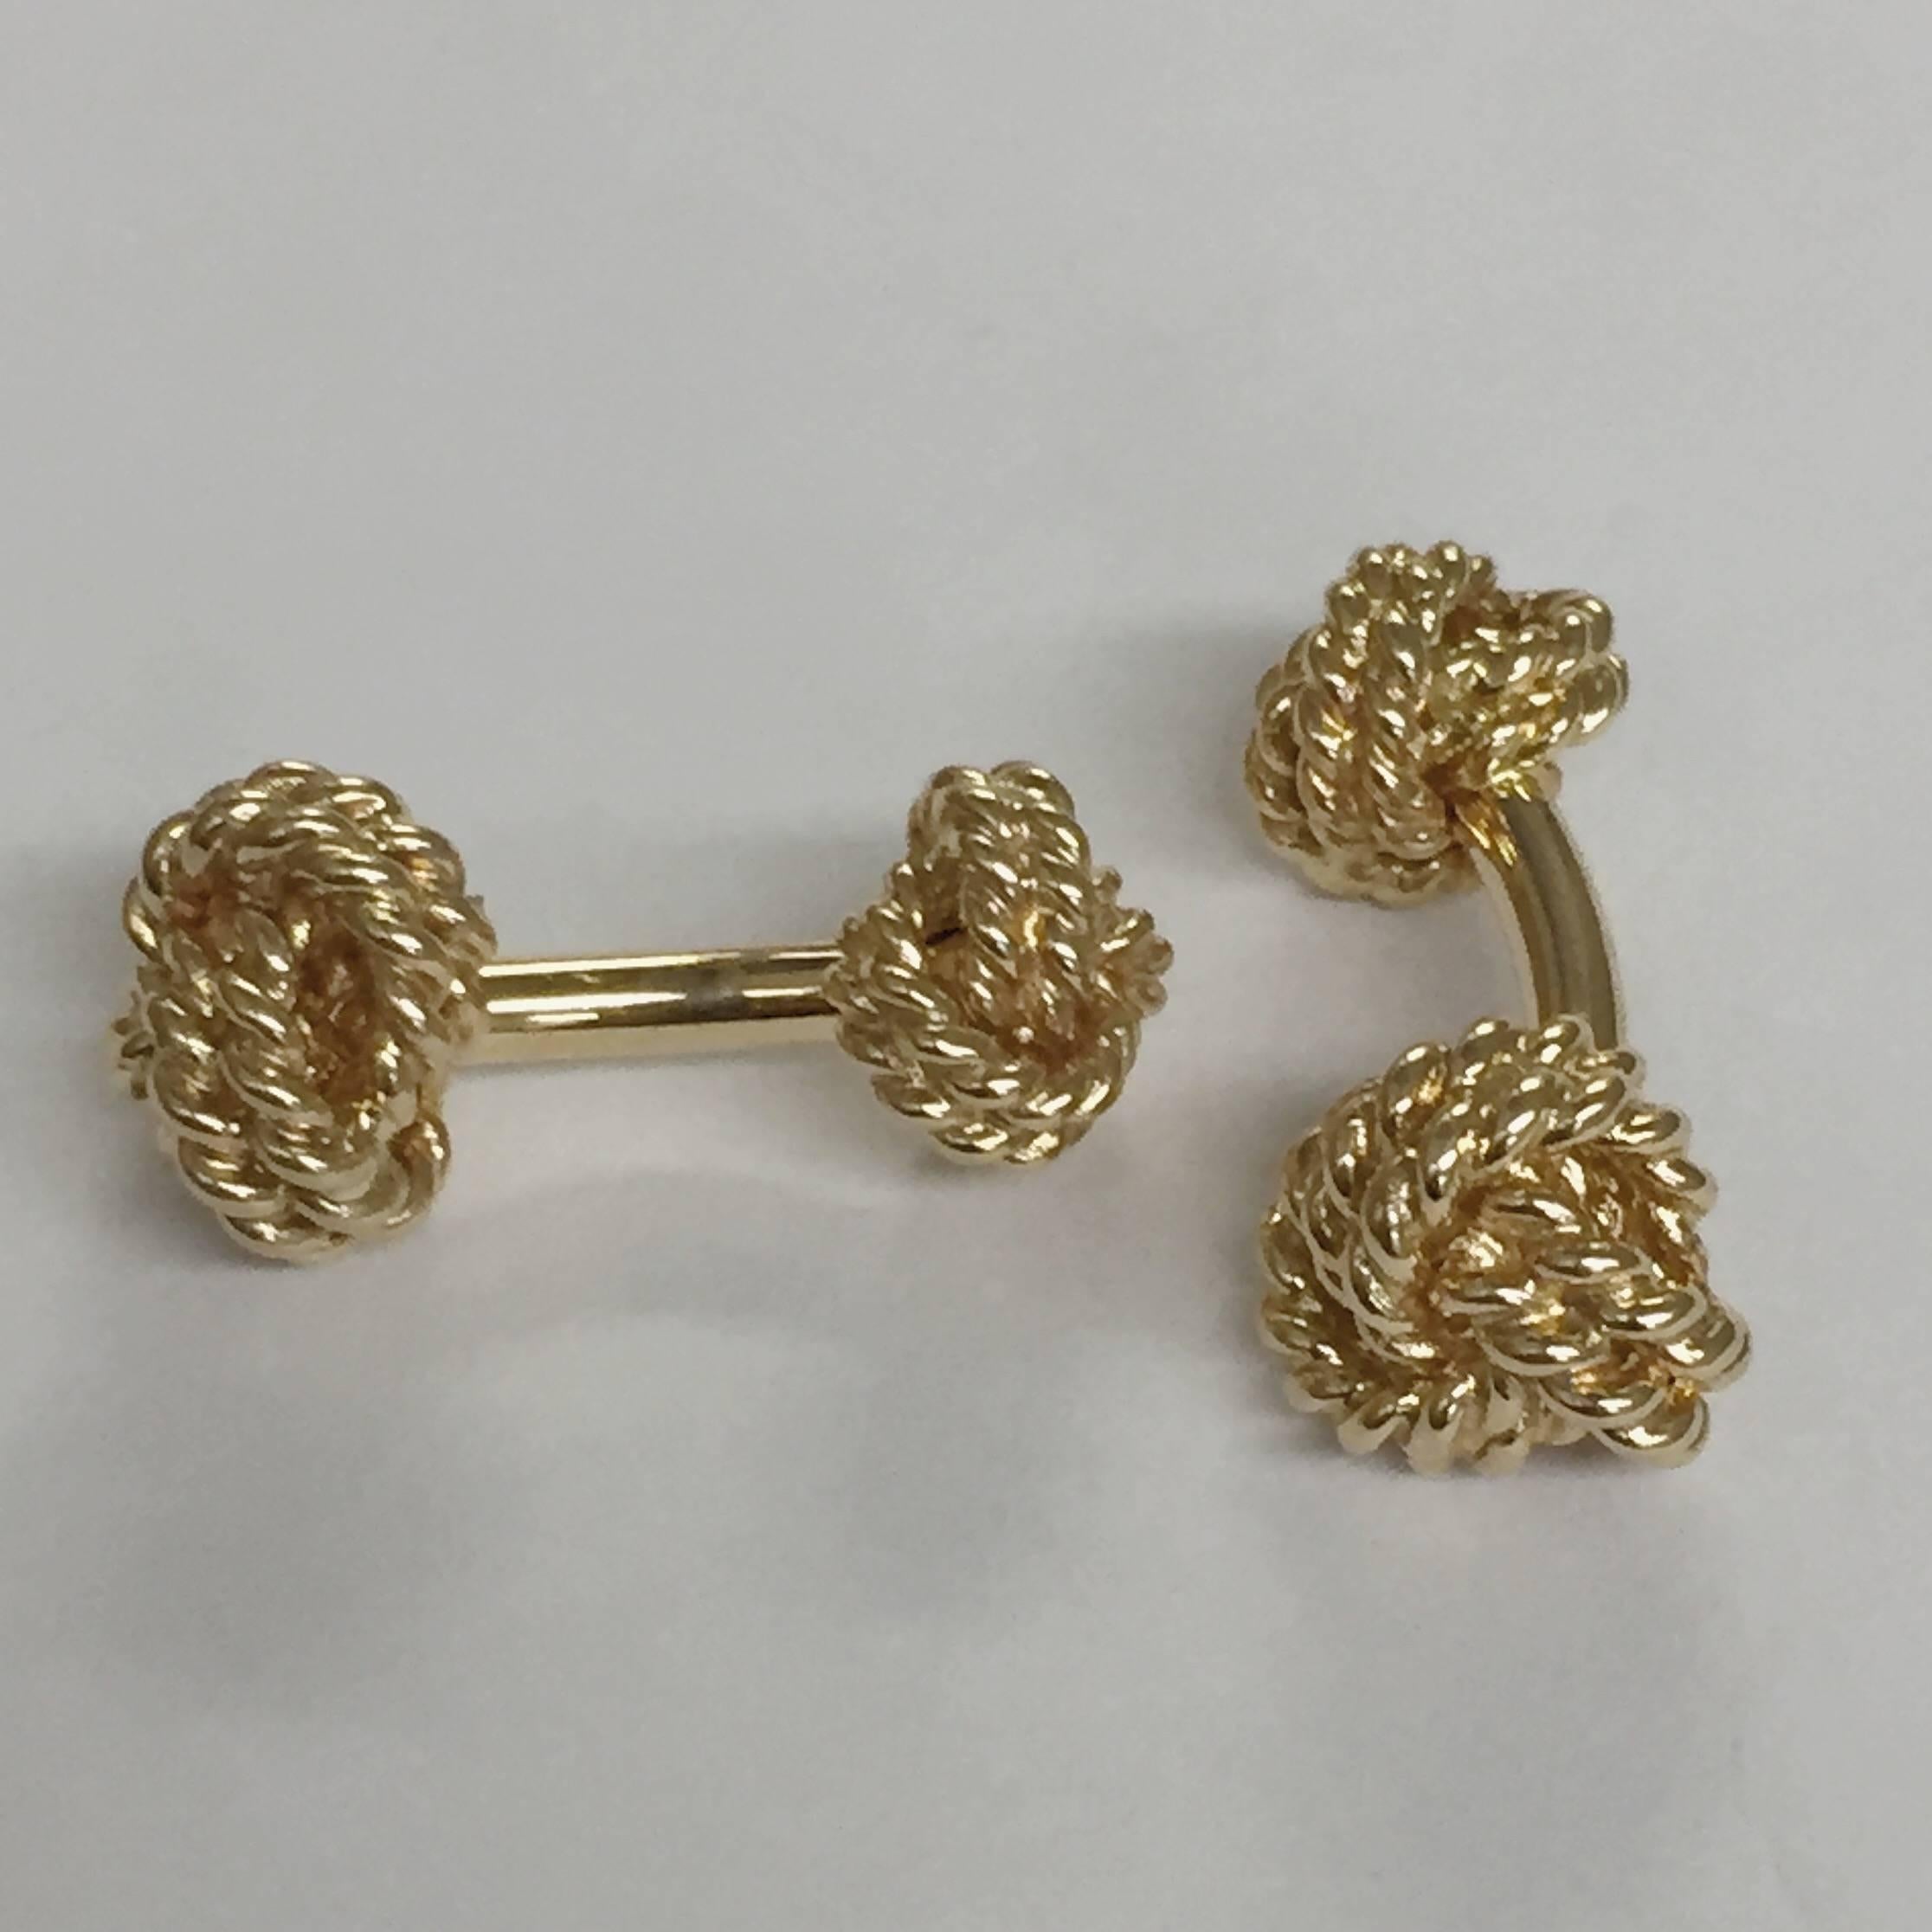 18kt Yellow Gold Twisted Rope Knot Cufflinks.  A classic!